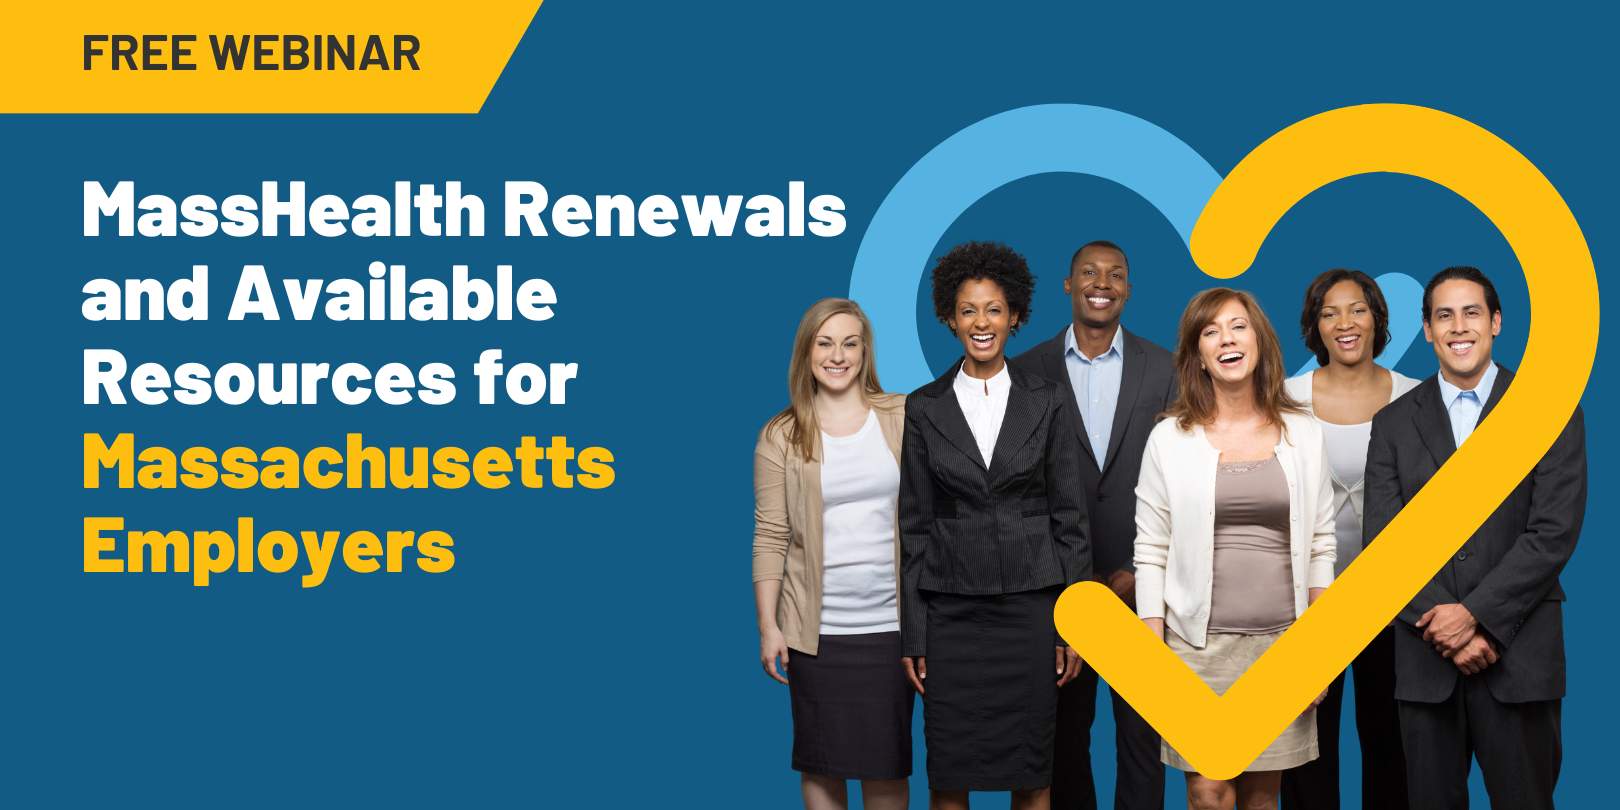 Free webinar MassHealth Renewals and Available Resources for Massachusetts Employers